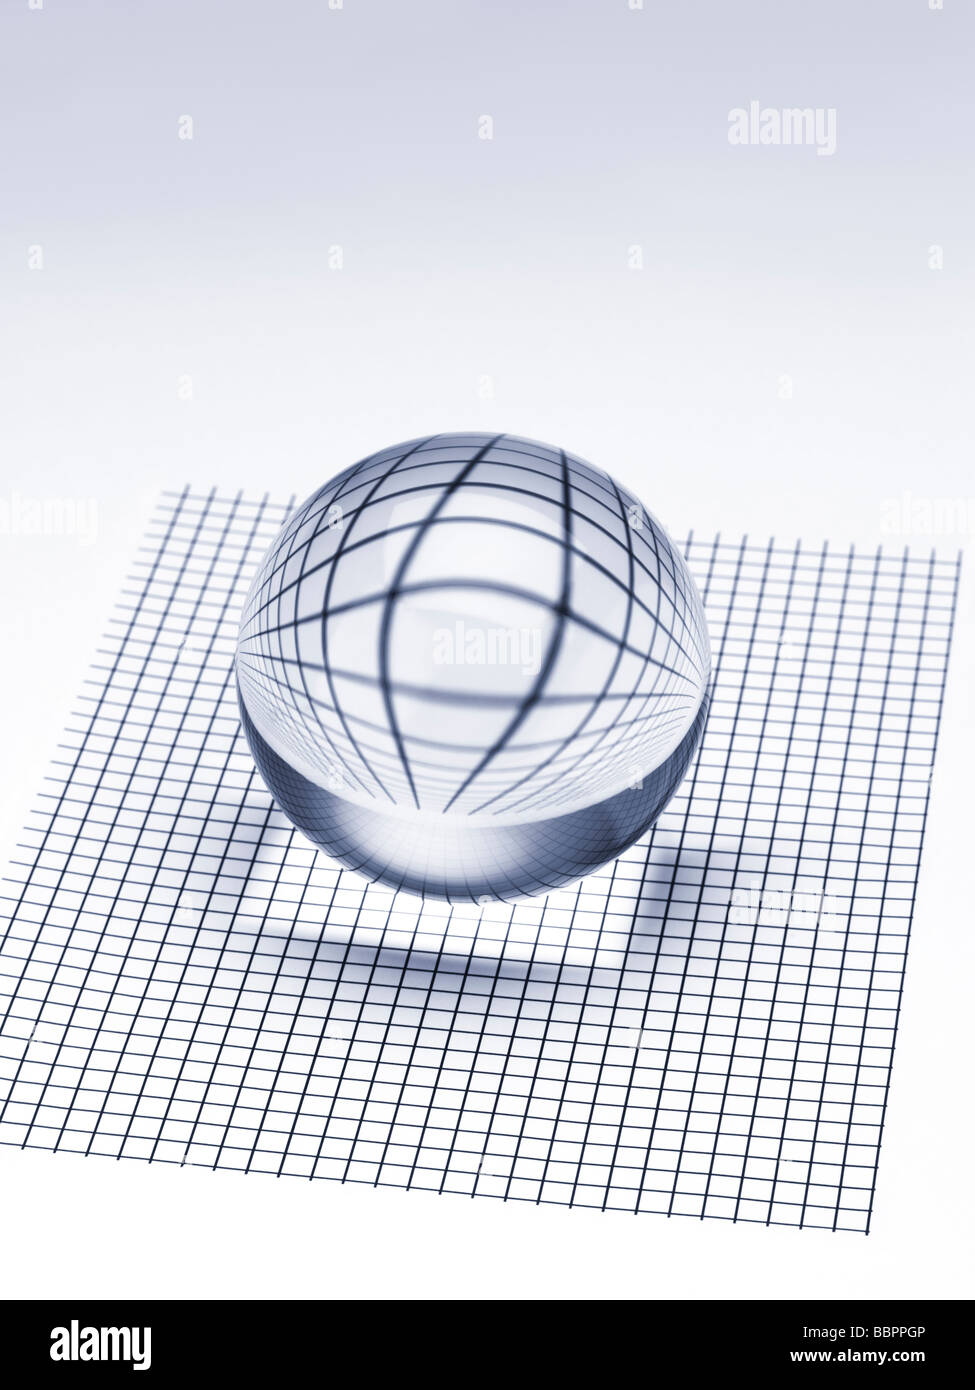 Abstract crystal ball on checked surface Stock Photo